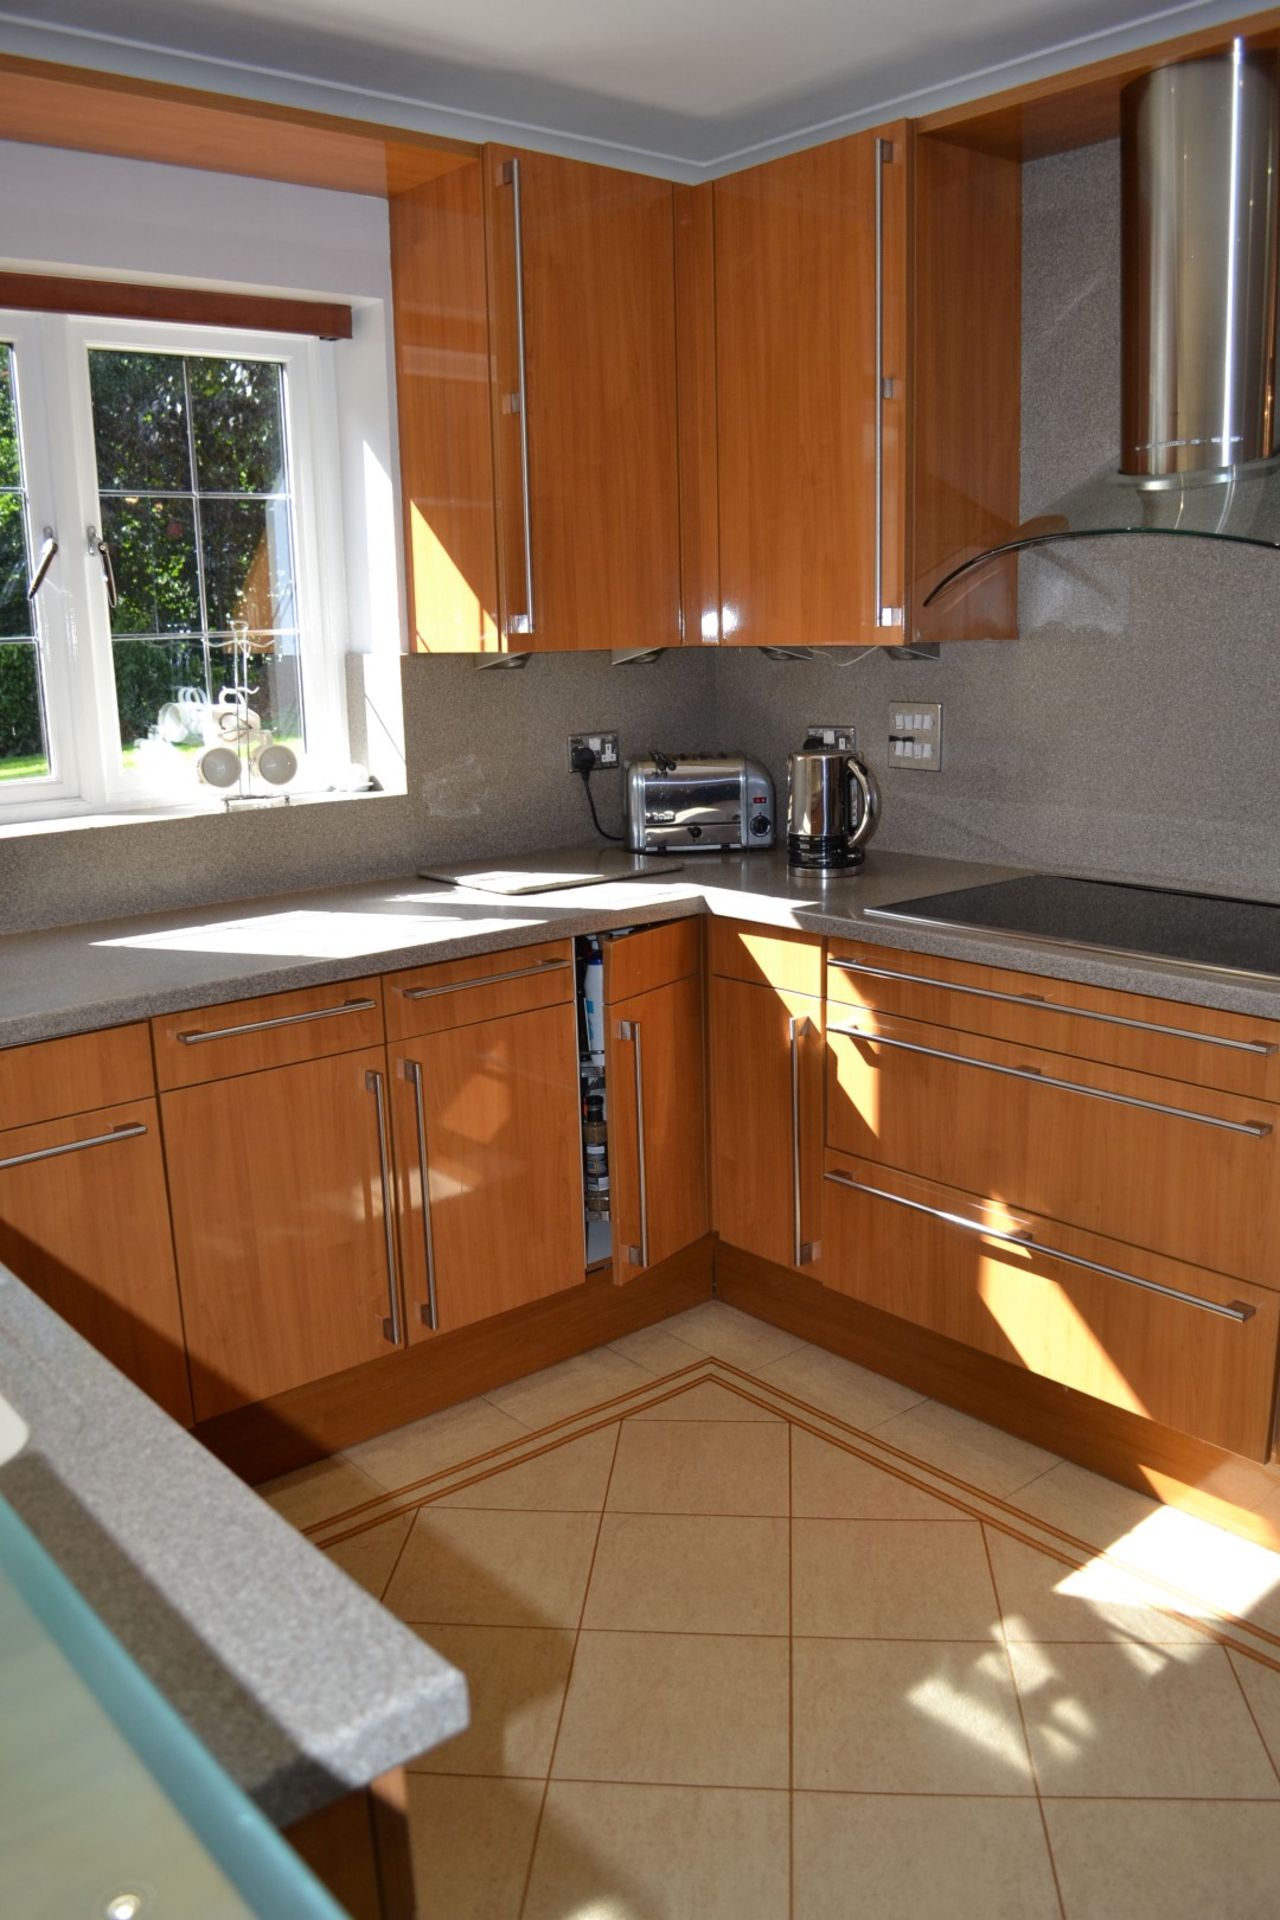 1 x Bespoke Siematic Gloss Fitted Kitchen With Corian Worktops and Frosted Glass Breakfast Bar - - Image 9 of 75